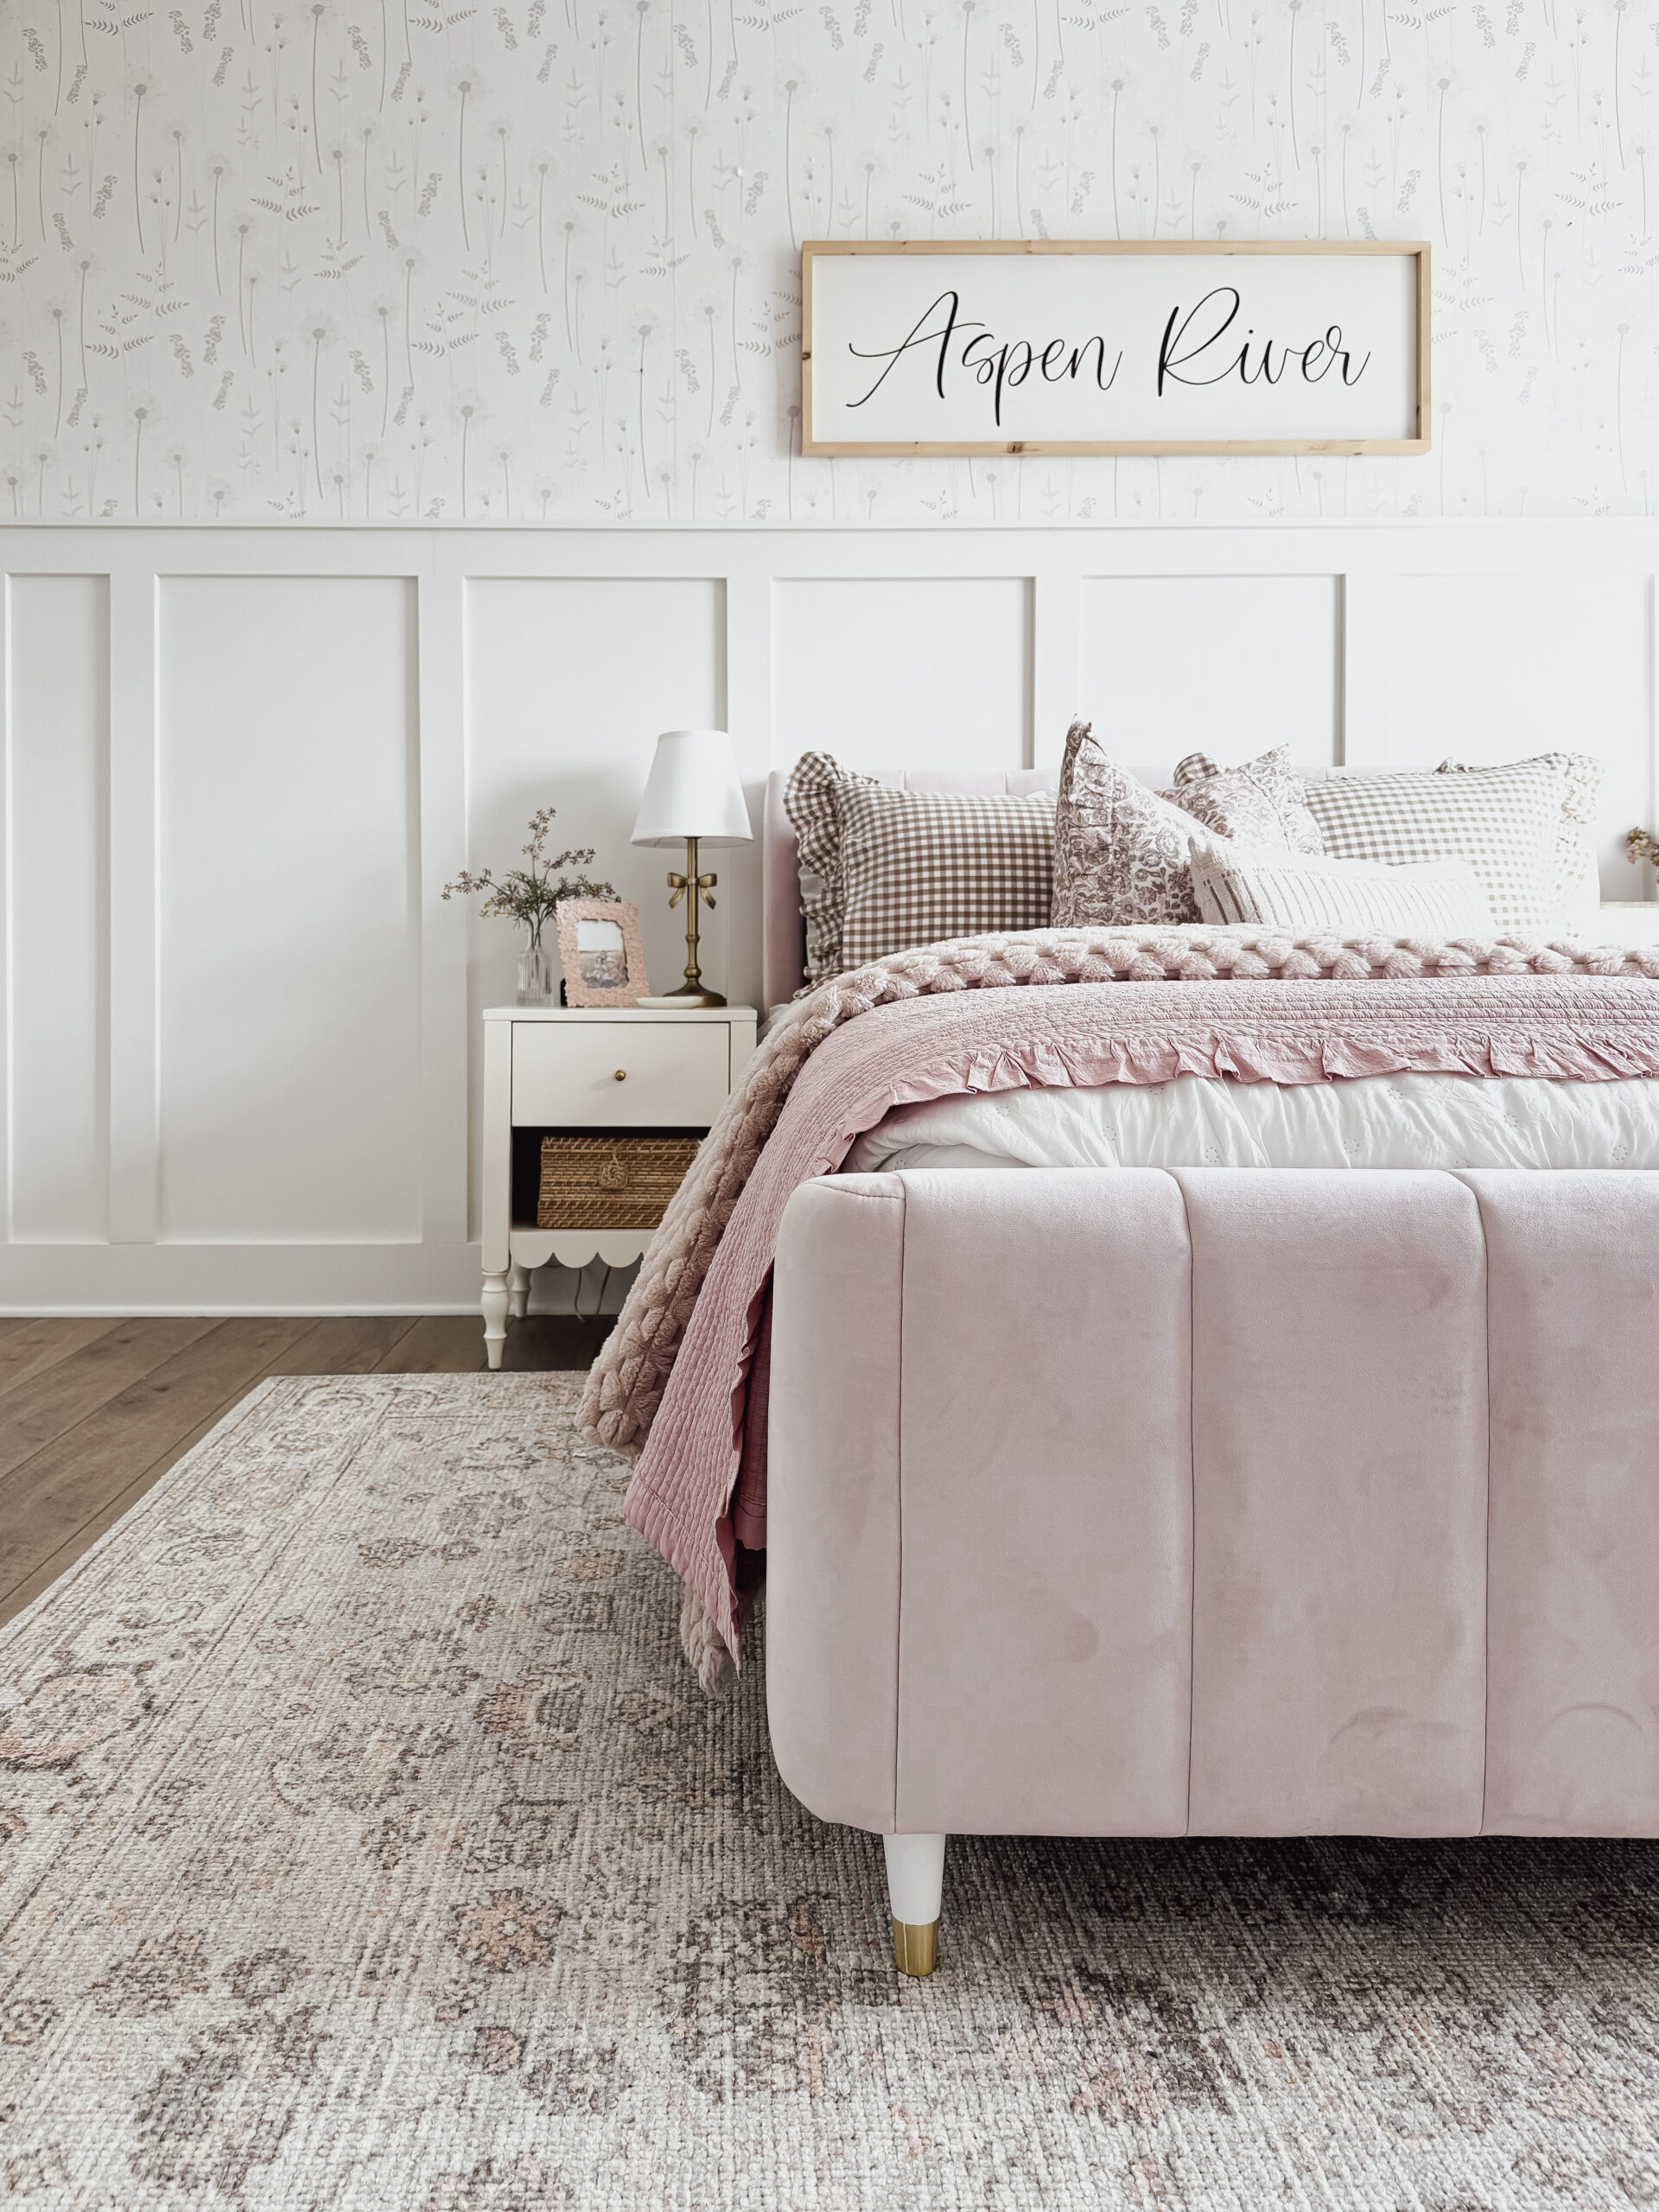 affordable home decor, girl's bedroom styling, girl's bedroom decor, bedroom, affordable bedroom decor, affordable bedroom finds for girls